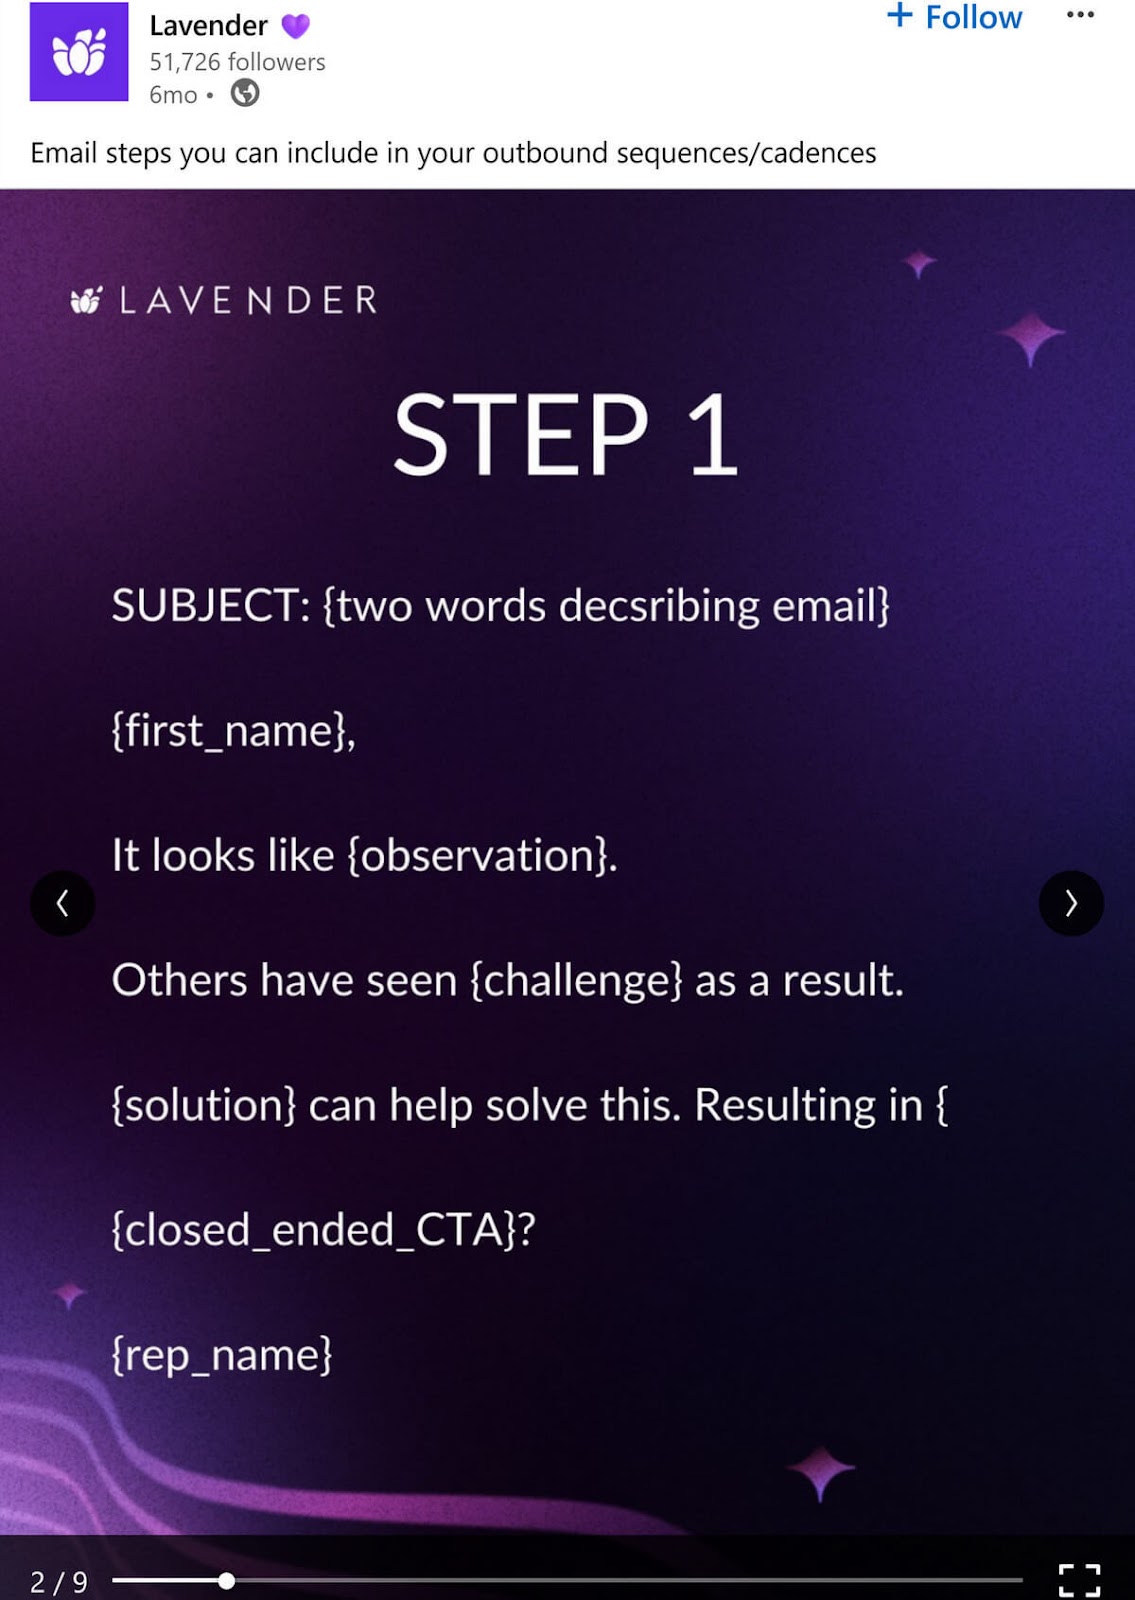 Lavender LinkedIn post showing an email template, all set against a dark purple background.